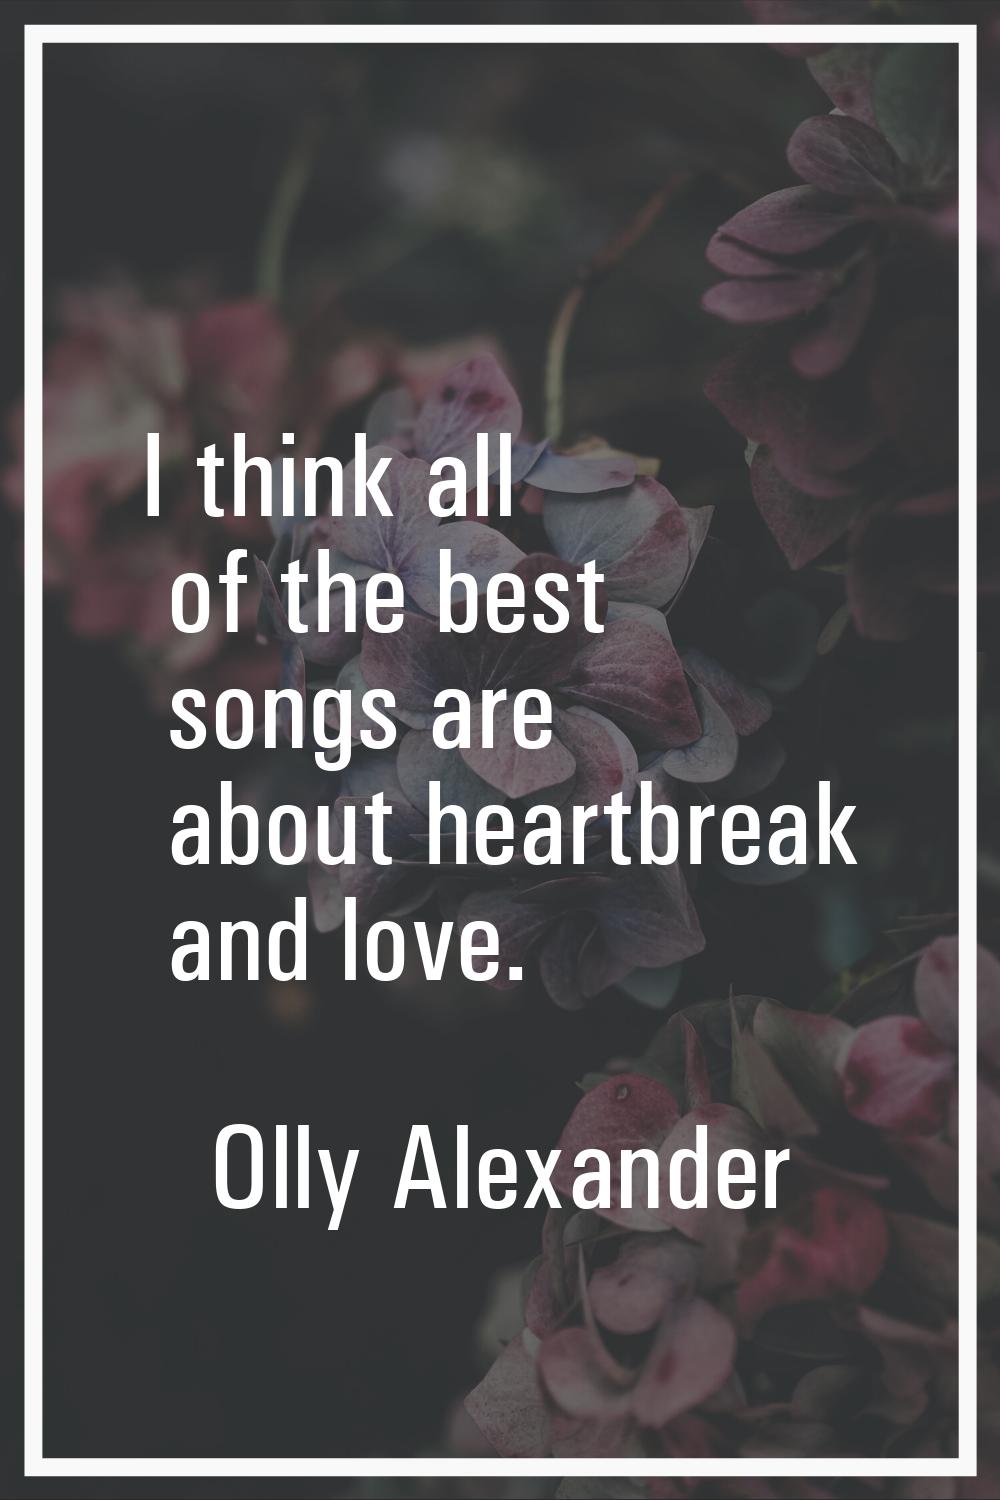 I think all of the best songs are about heartbreak and love.